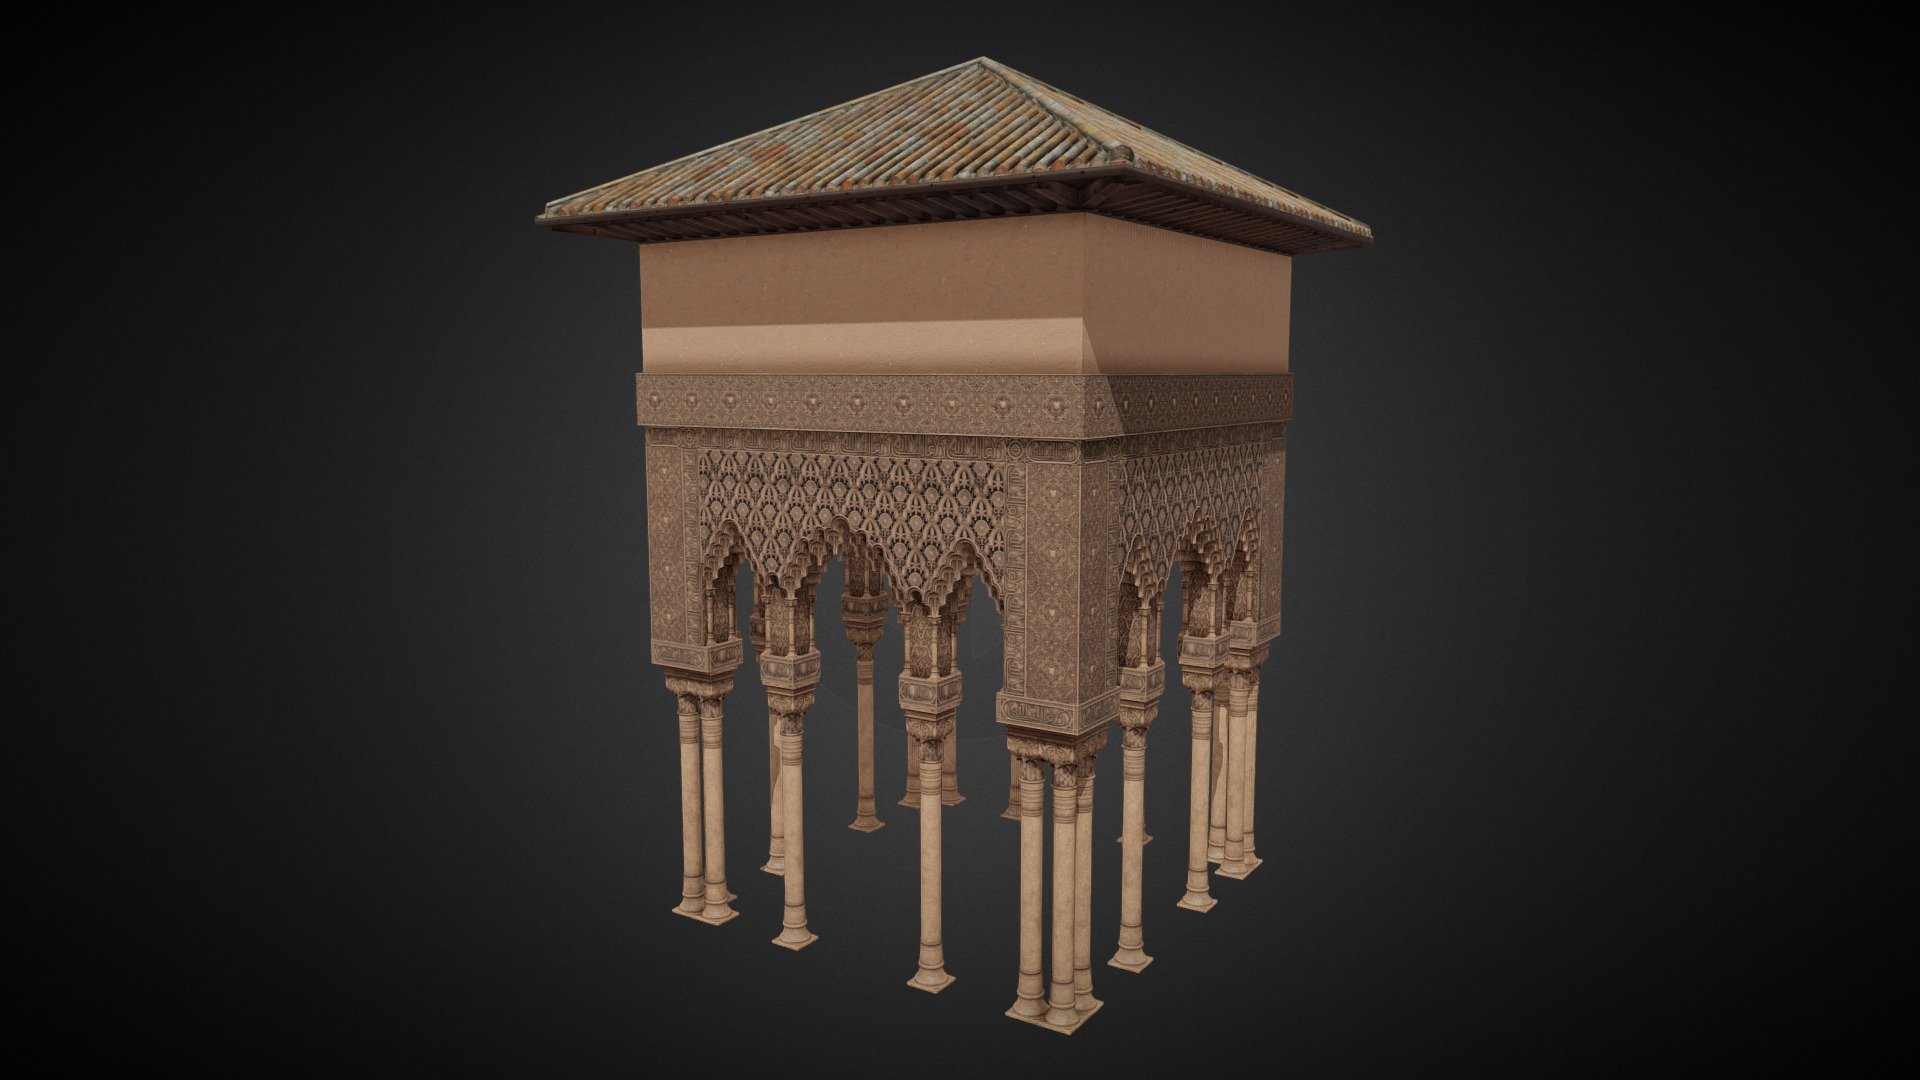 An isolated piece of the porticato around the Court of the Lions in the palace of Alhambra (Granada, Spain), reconstructed from pictures.

It is not accurate of course, the amount of different engravings present is hard to replicate from grainy pictures and then put on a handful of materials, but I'm very satisfied of the final result and the proportions should be very close to the real place.

Main detail are the muqarnas, geometrical pieces used to form arches and domes 3d model